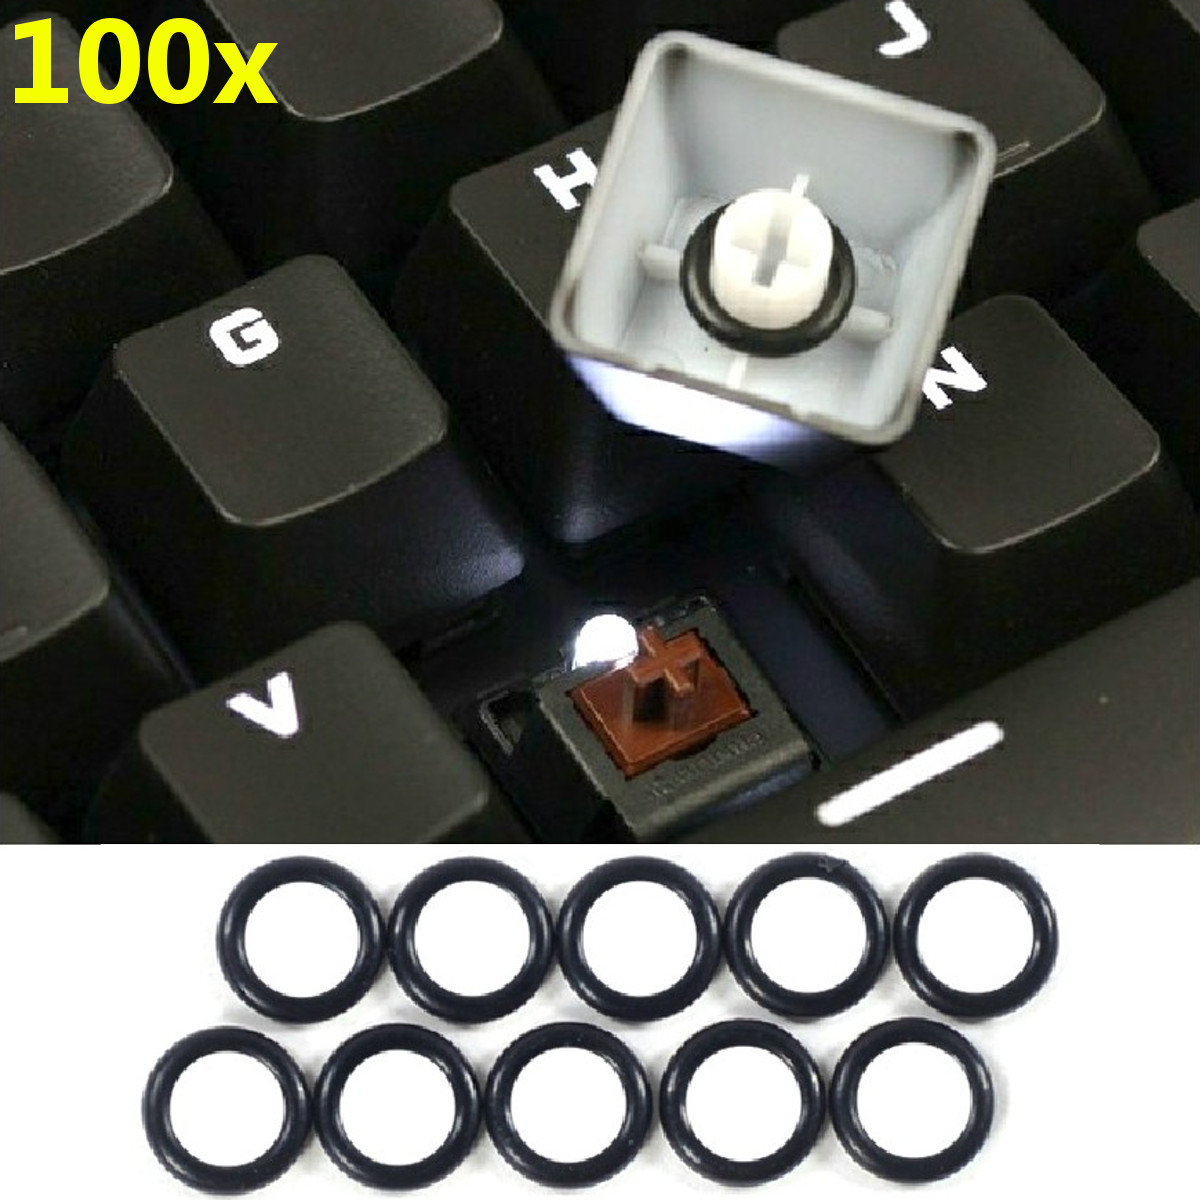 100 Mechanical Keyboard Keycap Rubber O-Ring Switch Dampeners for Cherry MX 43